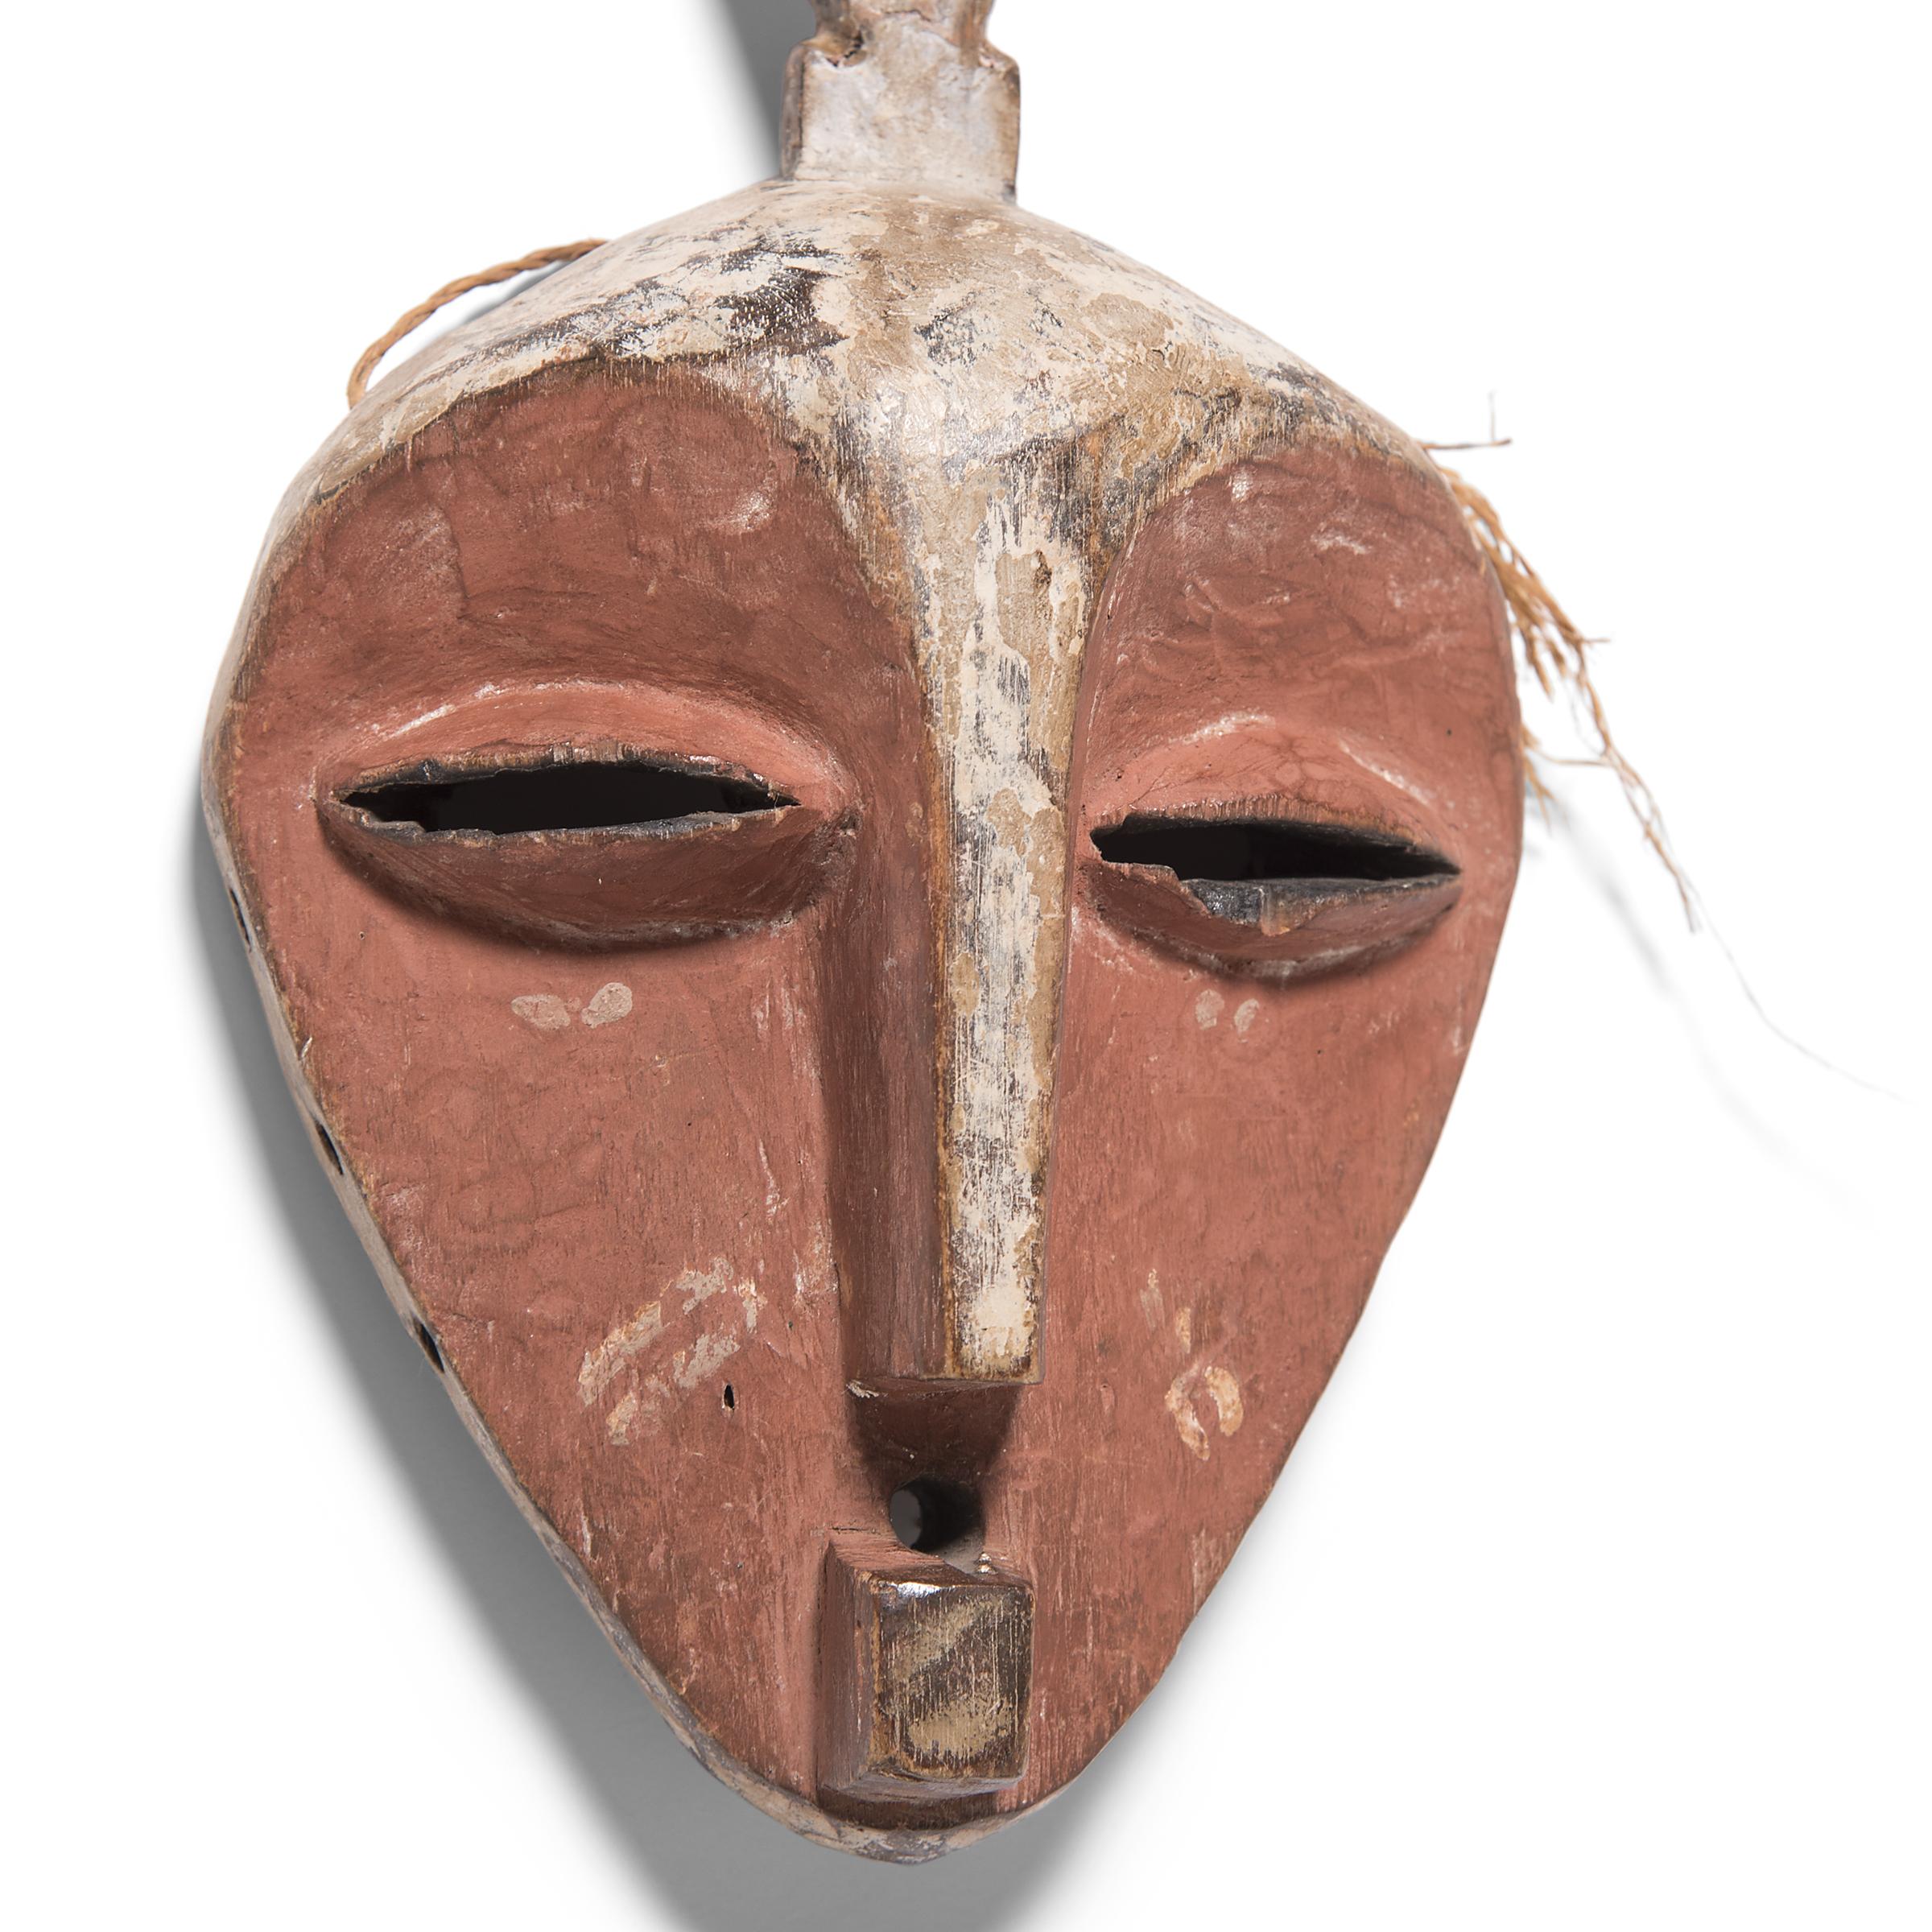 Masks from the Pende people of the Democratic Republic of the Congo are considered some of the most dramatic works of African art. The Pende have defined an extensive range of mask forms, many with distinct characters embodied during ritual